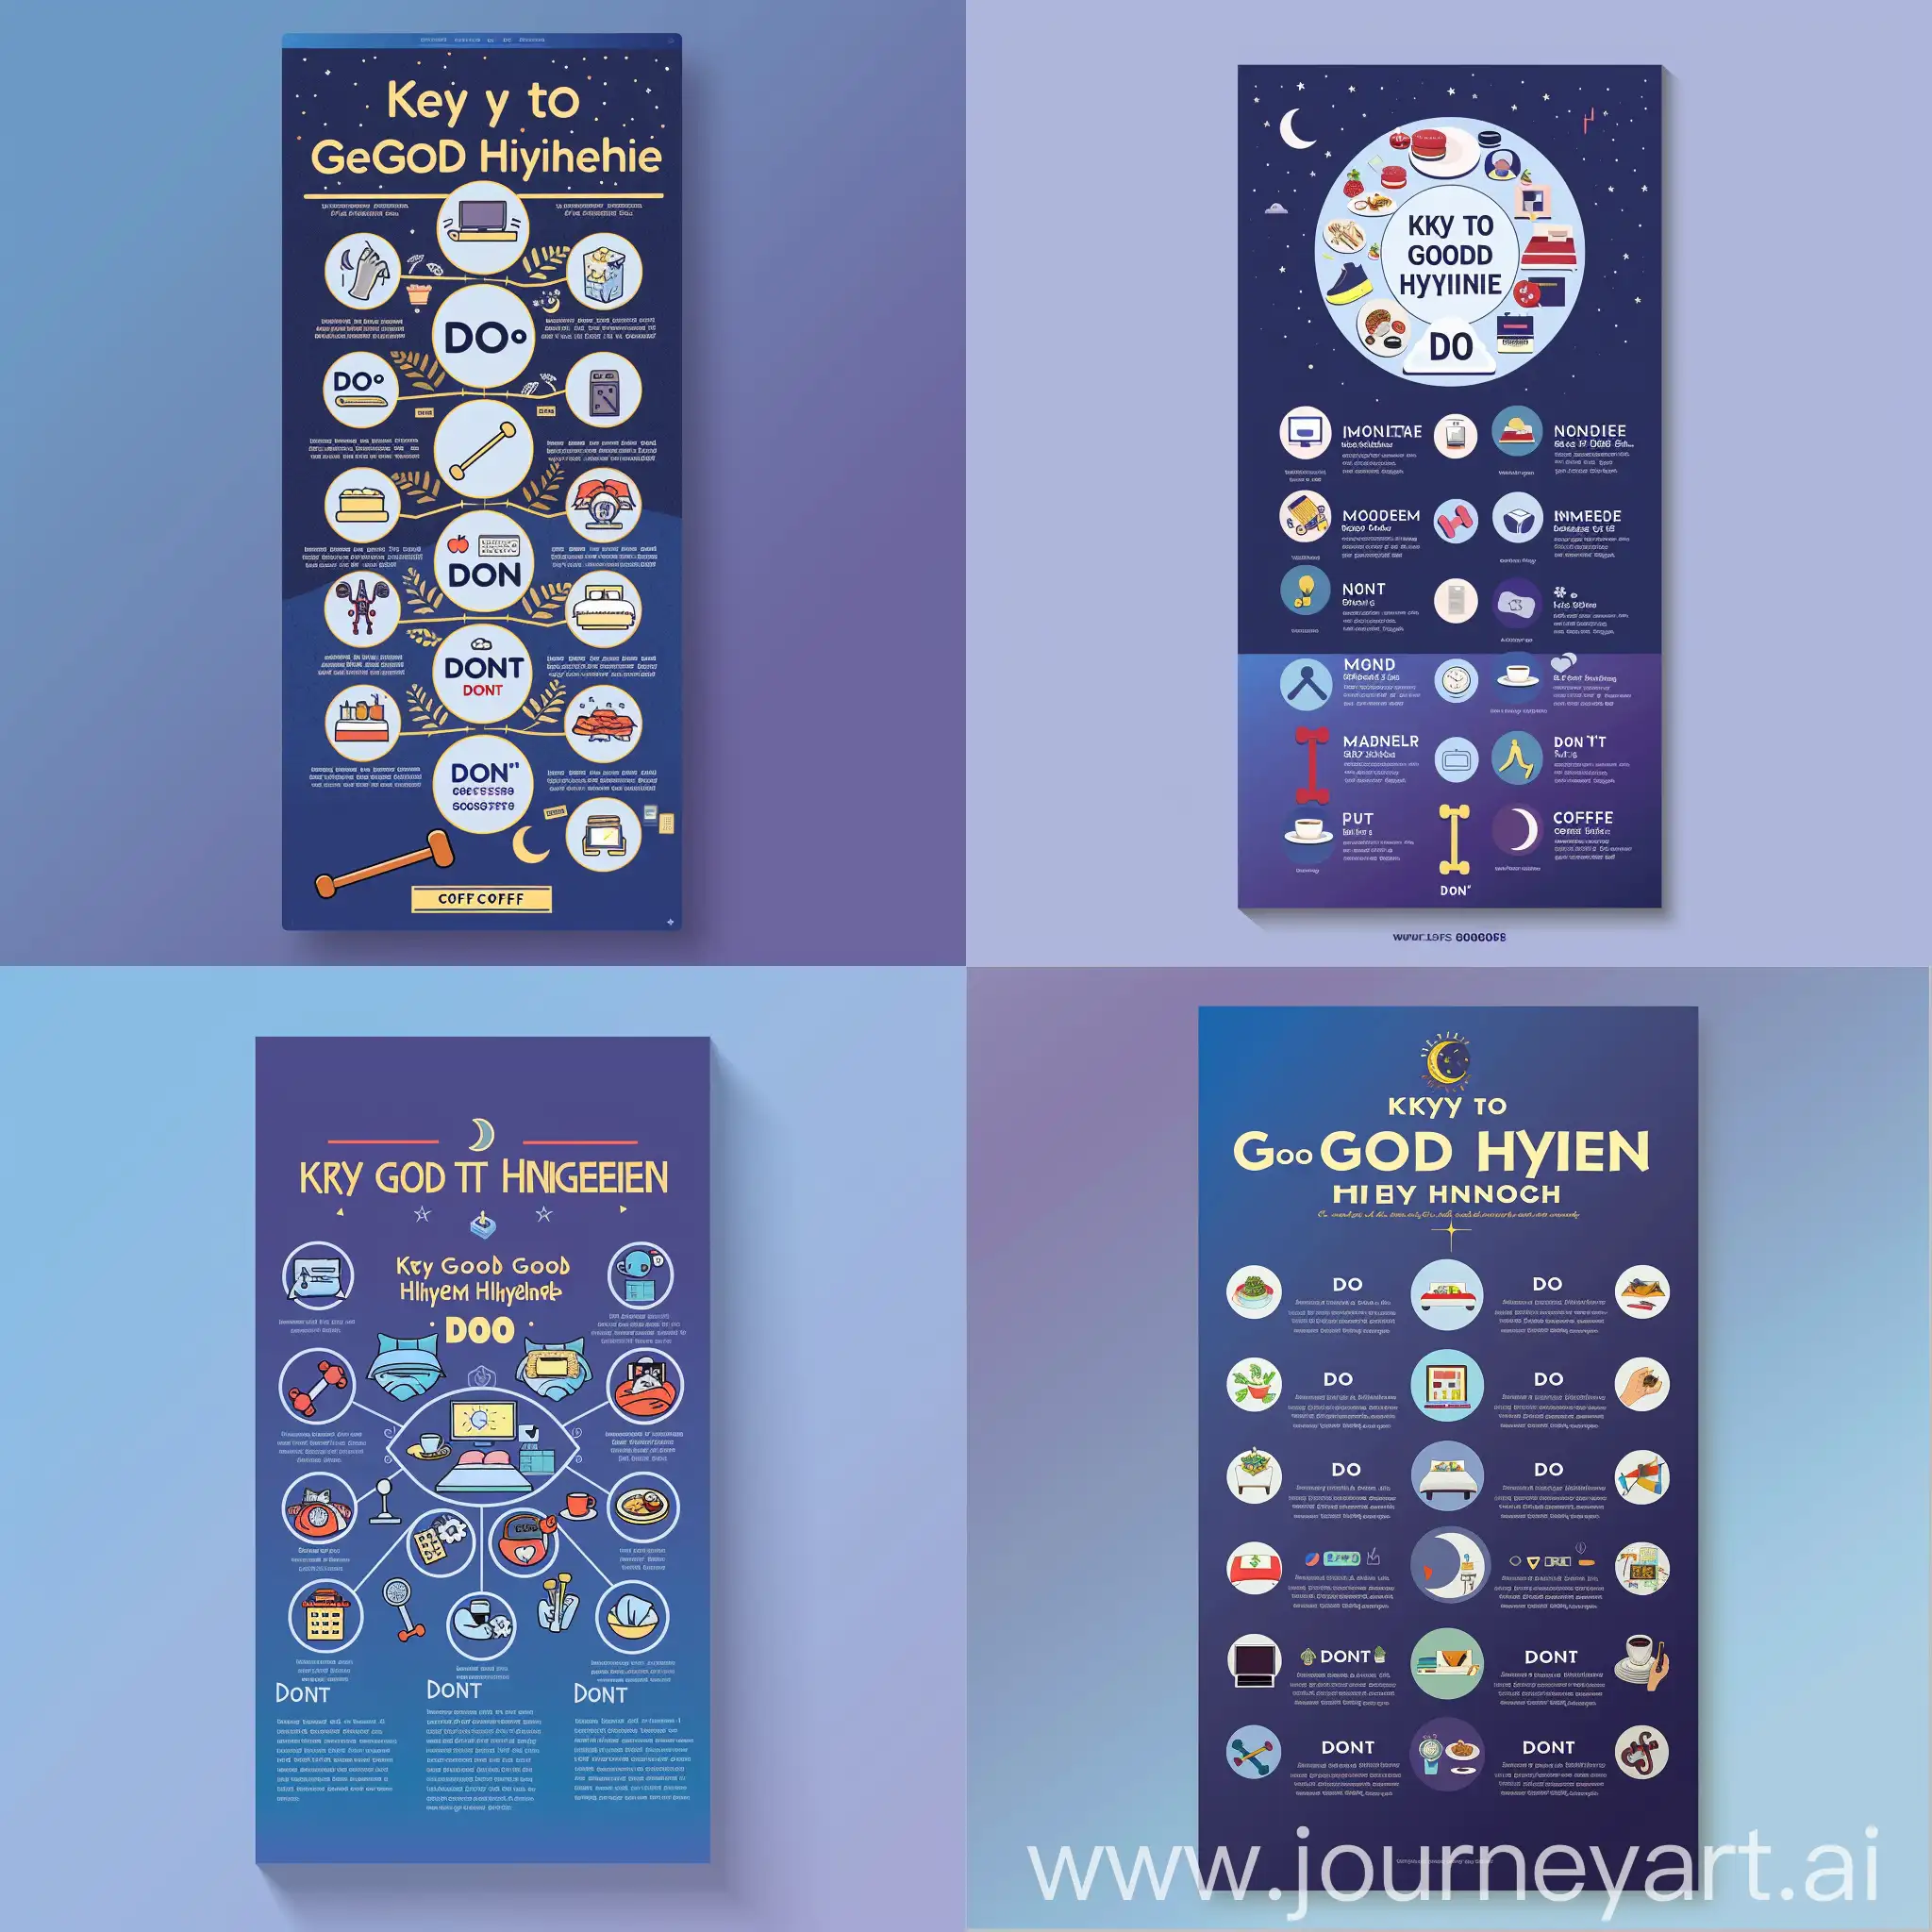 A vertical infographic poster with a centered title, 'Keys to Good Sleep Hygiene' in bold, playful font. Surrounding the title is a circular arrangement of illustrated recommendations, half marked 'DO' with corresponding images like a dumbbell, a computer with a moon icon, and a quiet dark bedroom. The other half marked 'DON'T' shows a bed with an alarm clock, a plate of food, a smartphone, and a cup of coffee. Each suggestion has a short descriptive text in a clear, simple font. The background is a smooth gradient from midnight blue at the bottom to light purple at the top, with dominant colors of blue (#0000FF), purple (#800080), and white (#FFFFFF). The style is flat design, with simple shapes and minimal shading to convey the concepts.